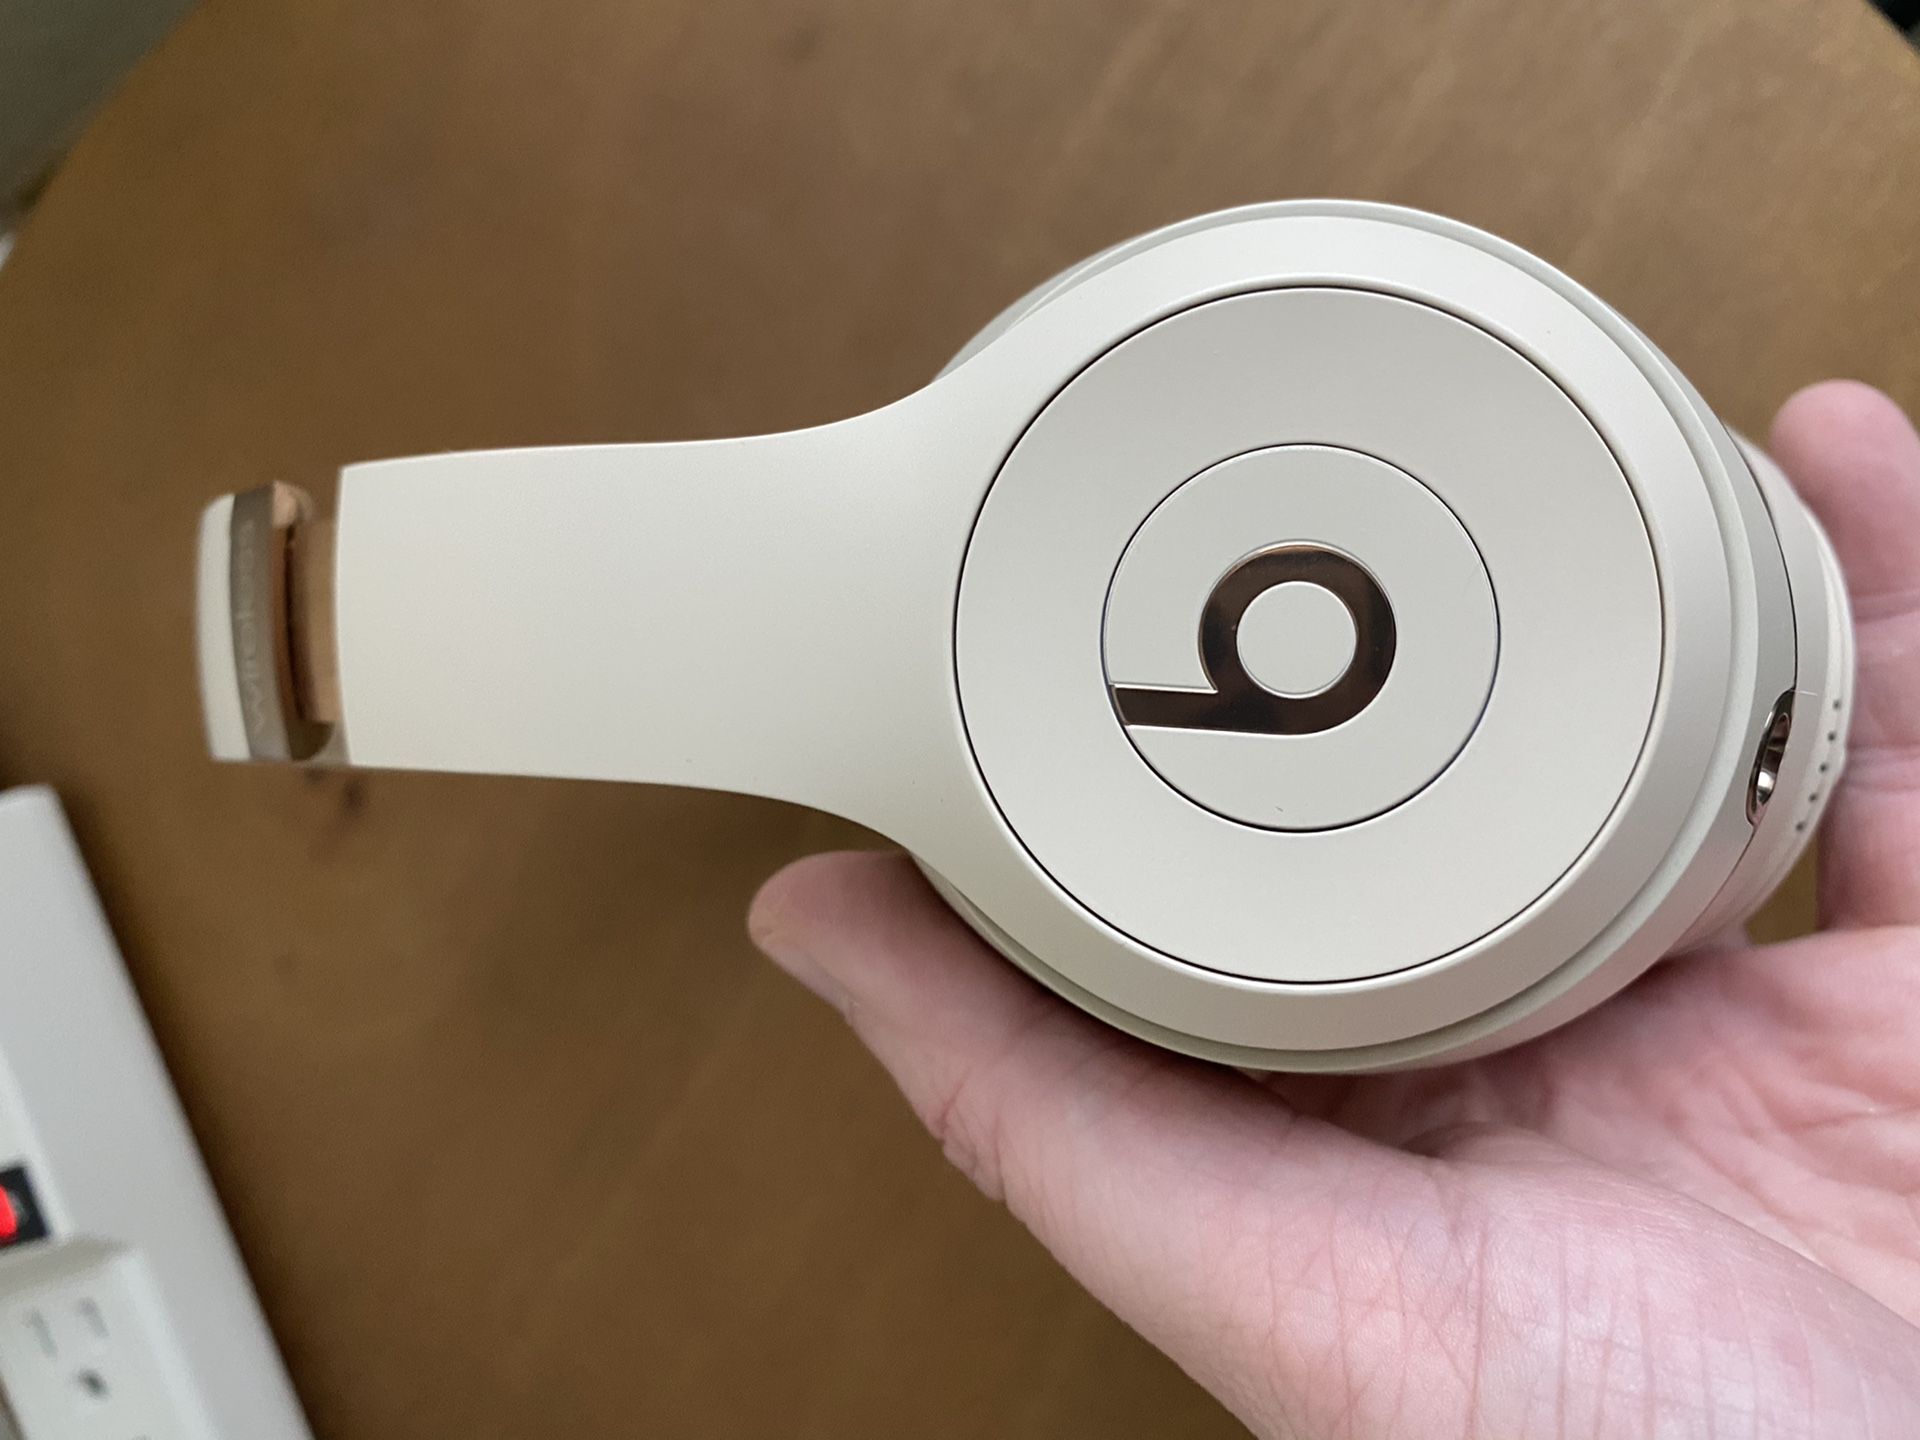 Brand New Beats Solo 3 - Will Trade for AirPod Pro